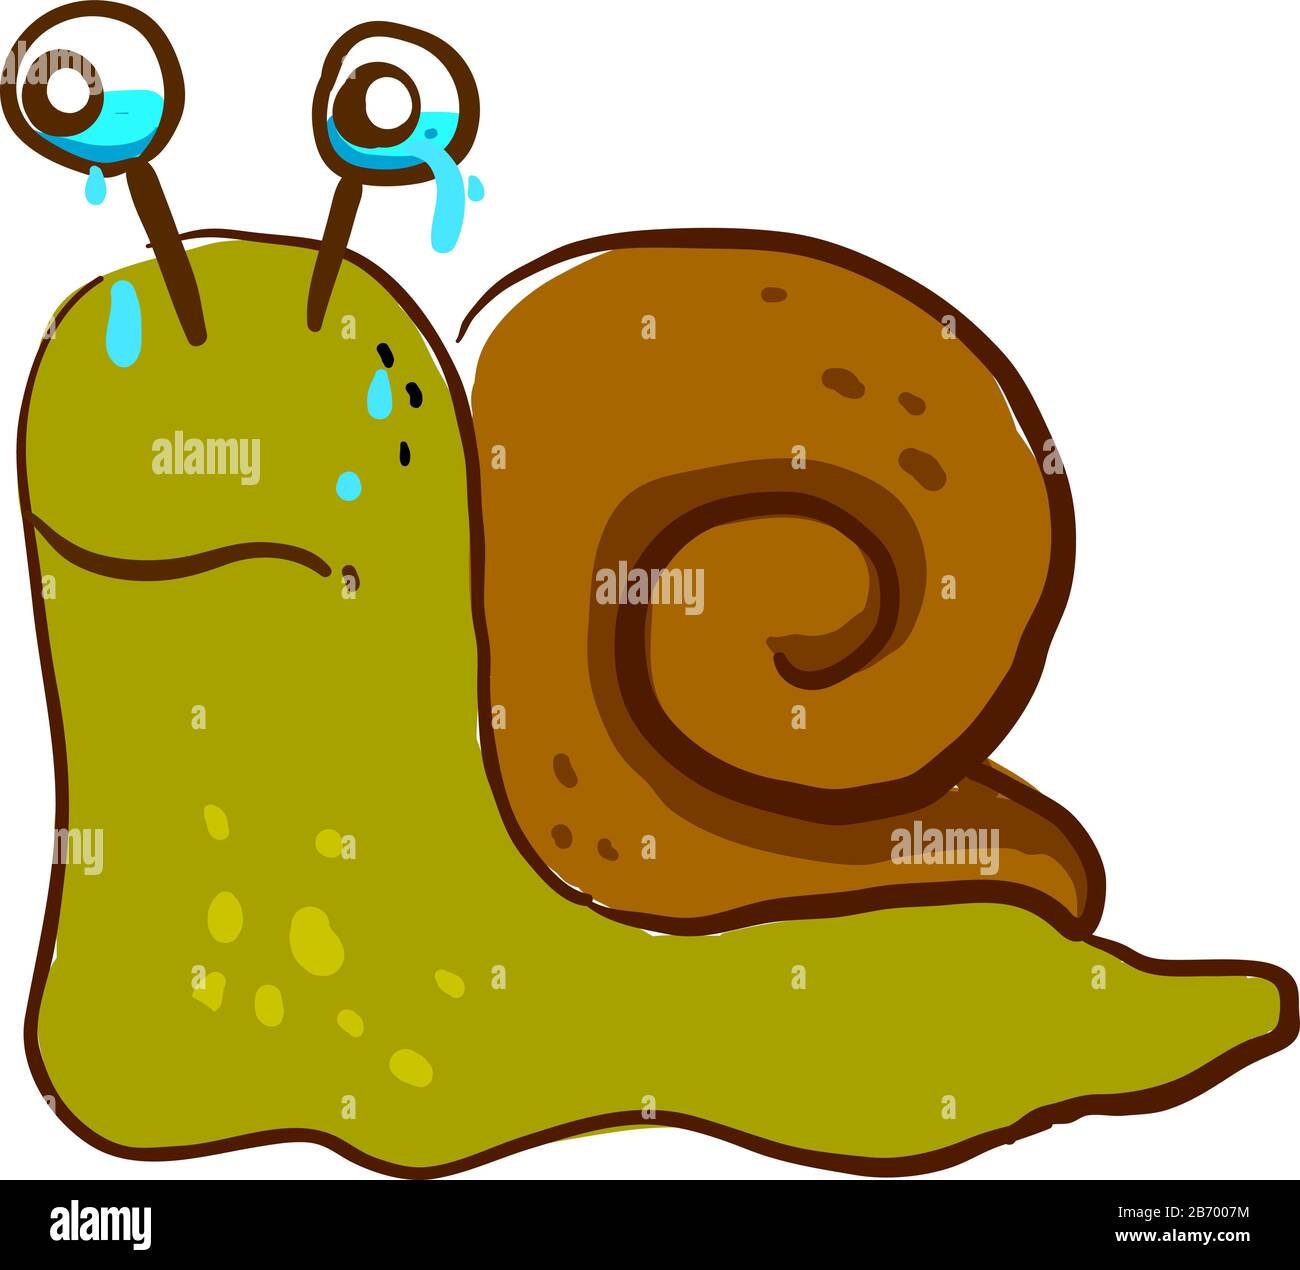 Snail crying, illustration, vector on white background. Stock Vector